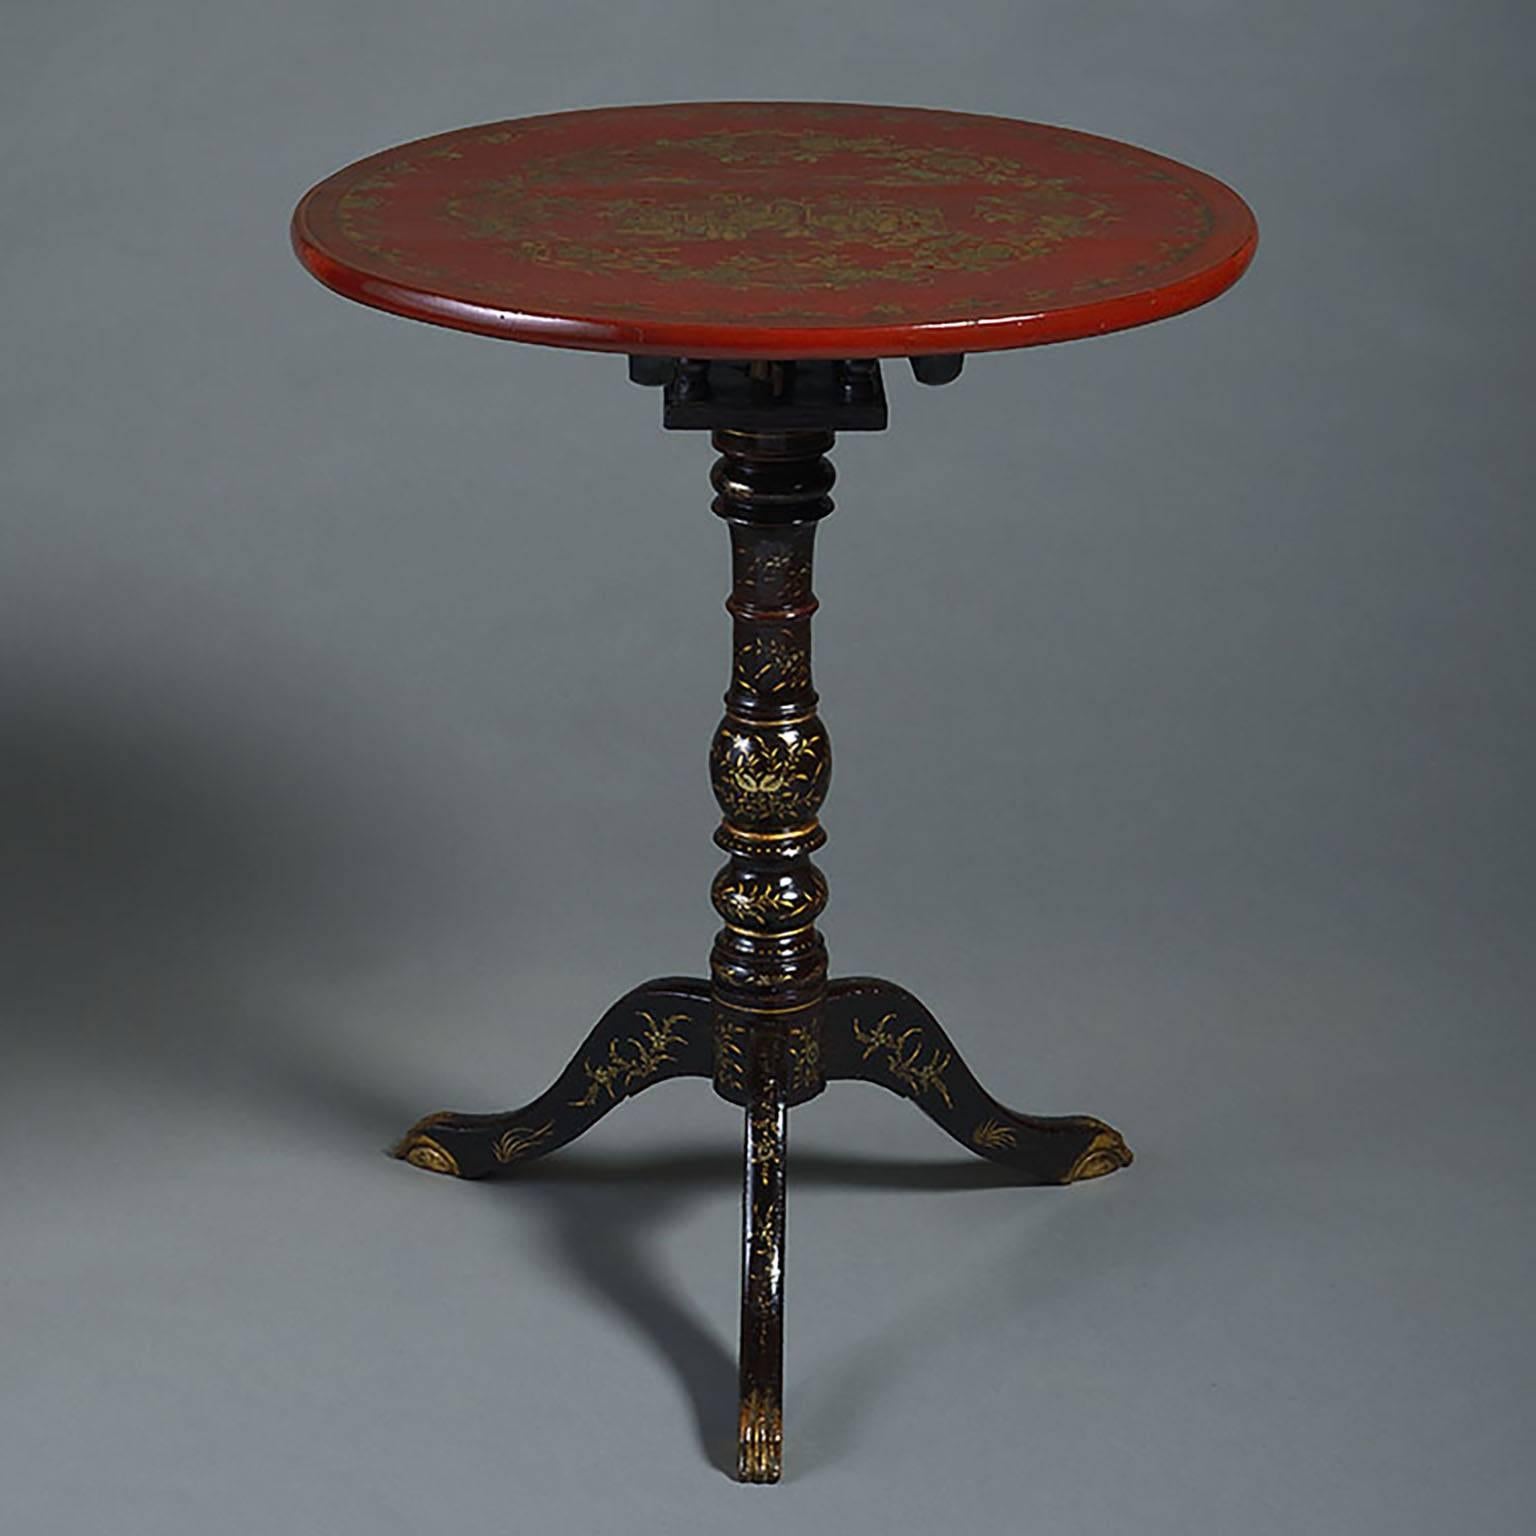 A fine mid-19th century Canton lacquer tilt top occasional table, the top decorated with pavilions and figures and foliate decoration, supported on a black lacquer pedestal tripod base.